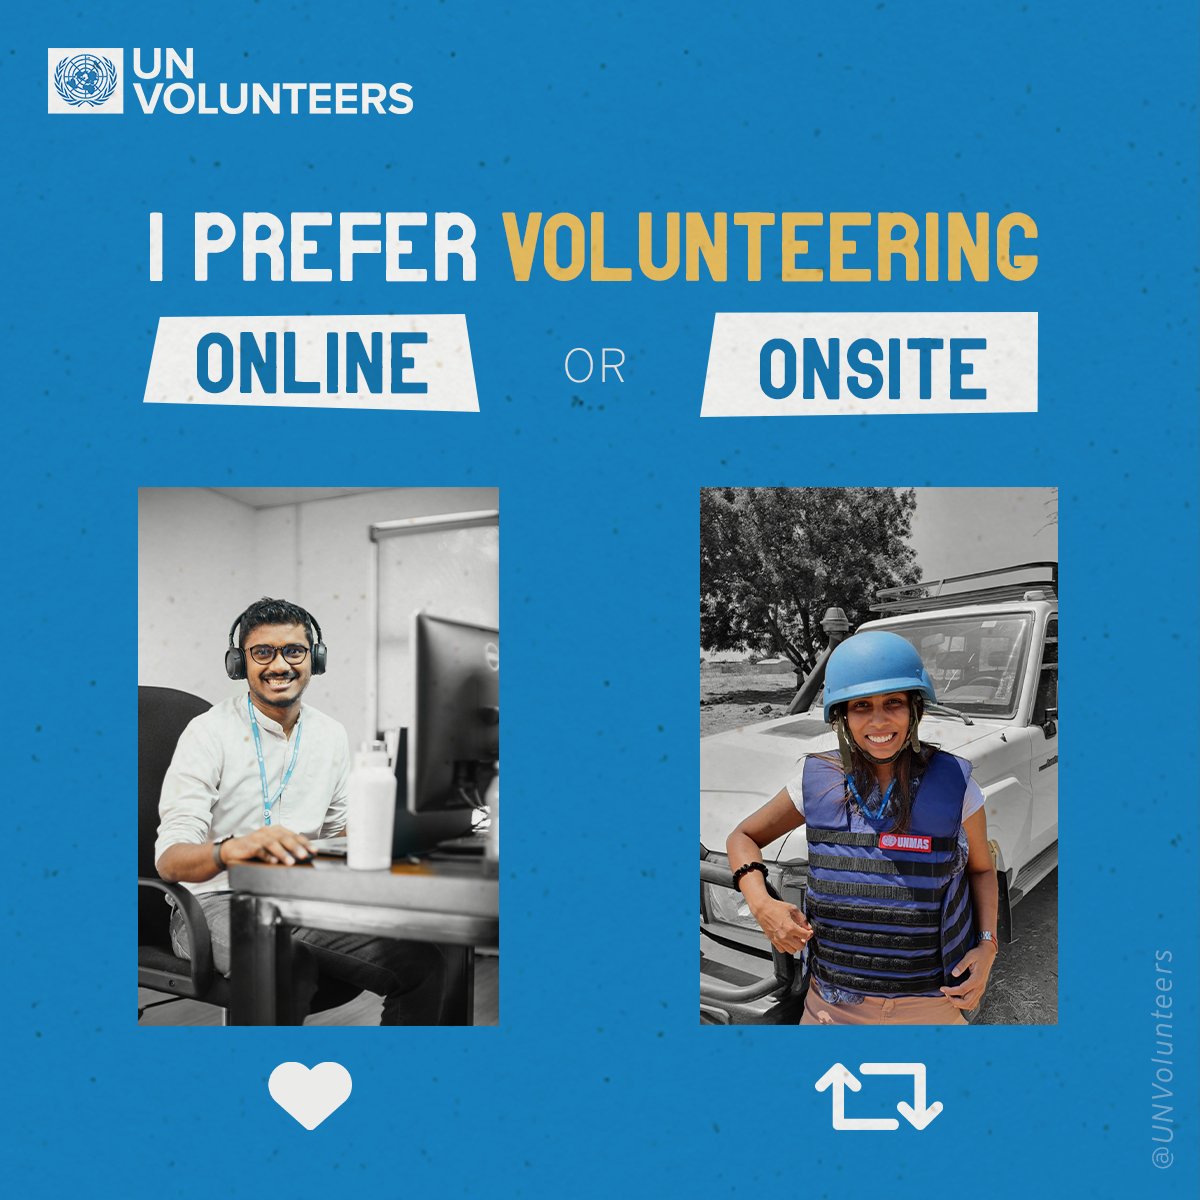 Do you prefer to volunteer in the comfort of your home or hands-on? Like 💙 for online or retweet 🔁 for onsite!